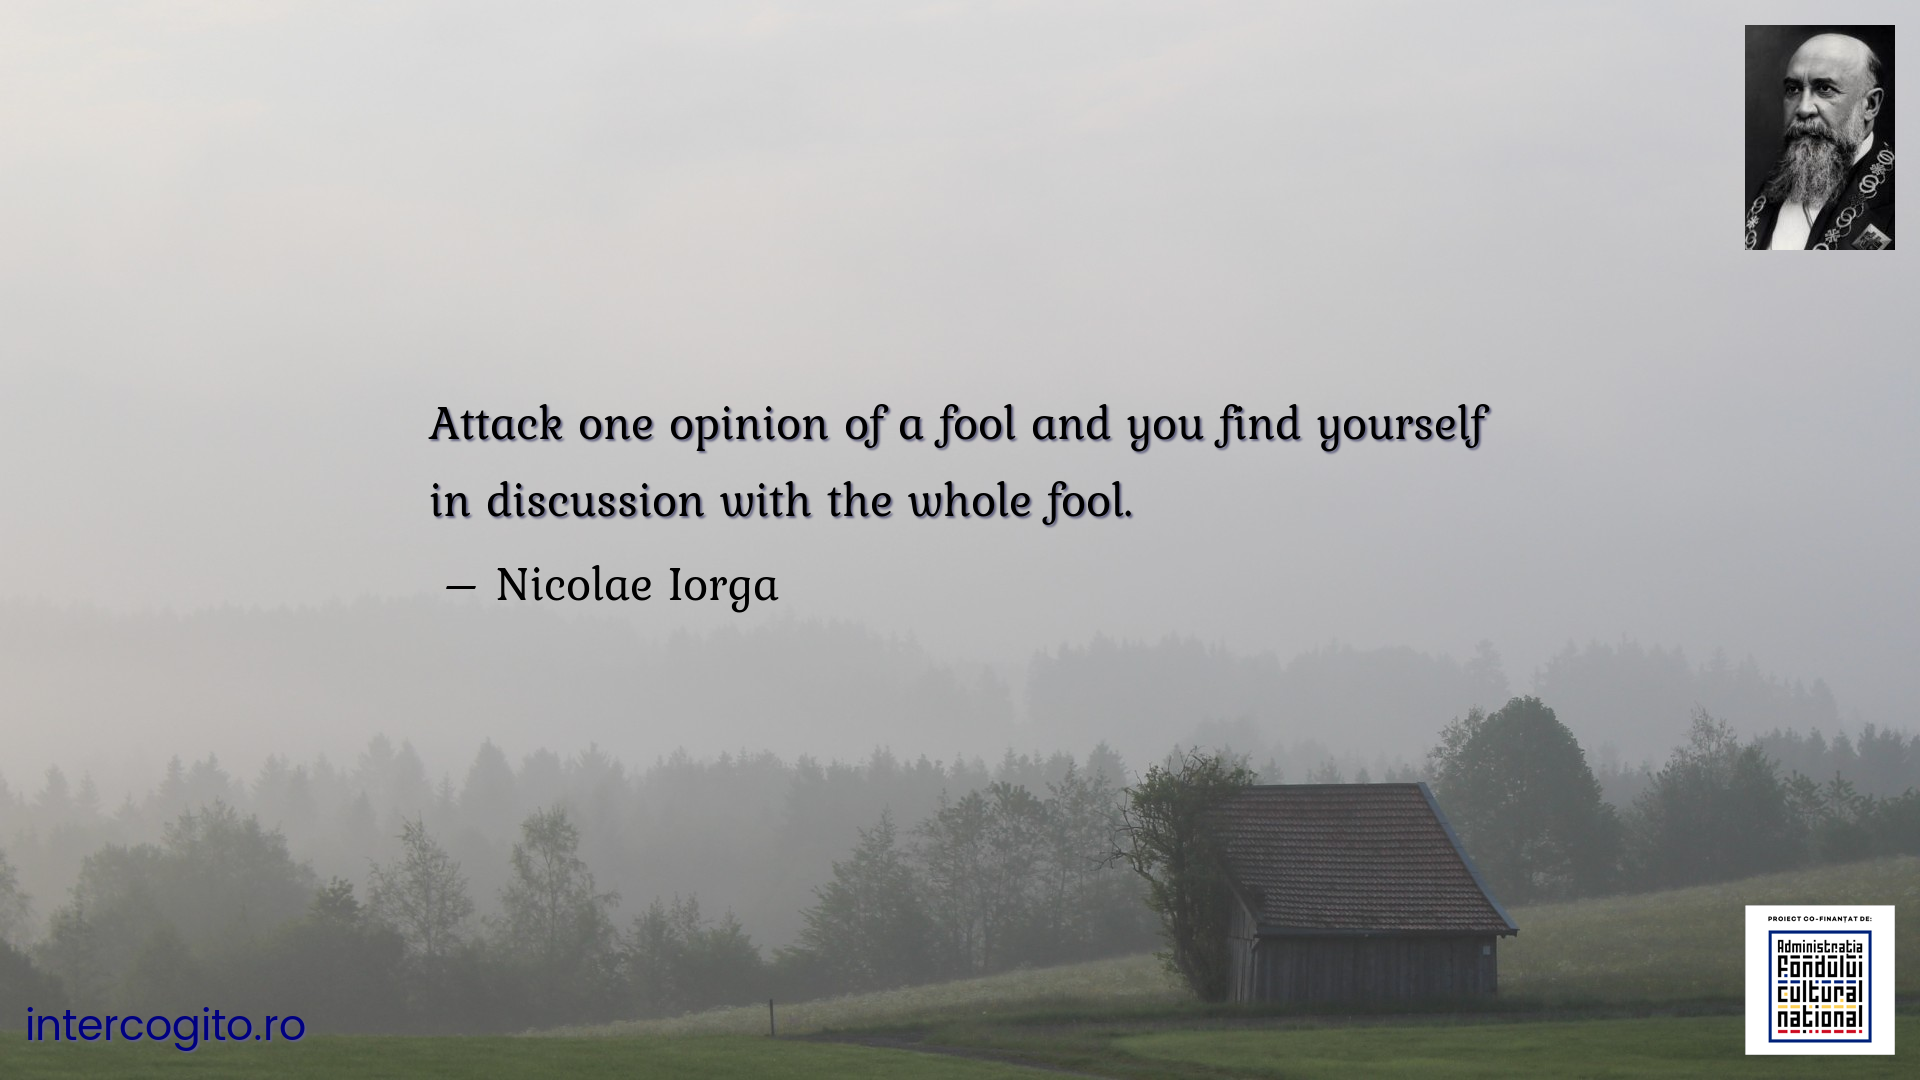 Attack one opinion of a fool and you find yourself in discussion with the whole fool.